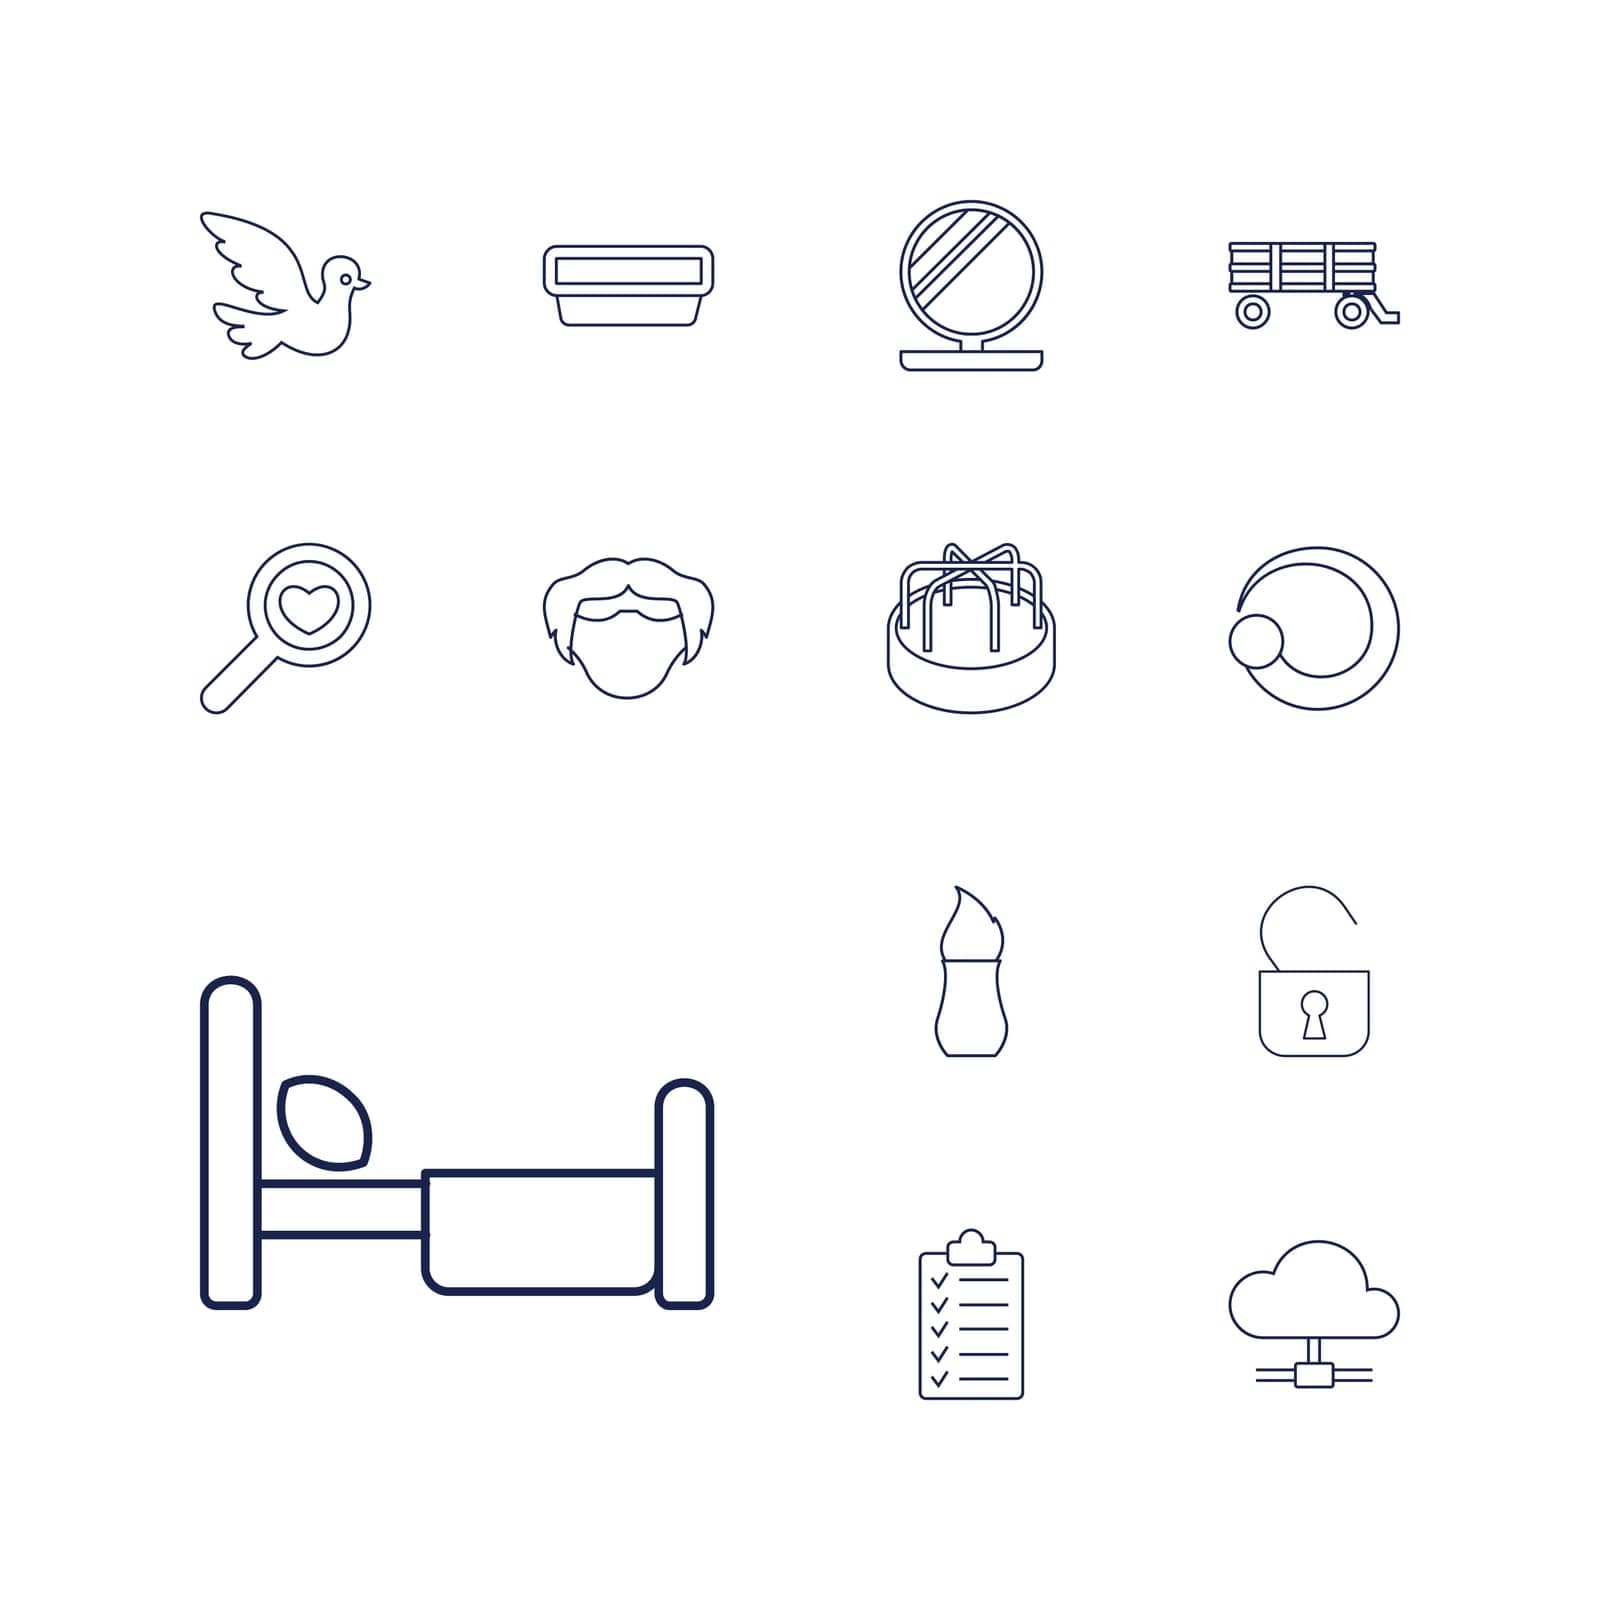 bed,symbol,icon,sign,isolated,for,powder,carousel,pictograph,cloud,hair,search,white,pot,web,plants,bird,design,lock,playground,vector,man,graphic,element,brush,barrow,art,set,black,equipment,opened,checklist,collection,loading,heart,hairstyle,face,background,silhouette,style,illustration,object,child